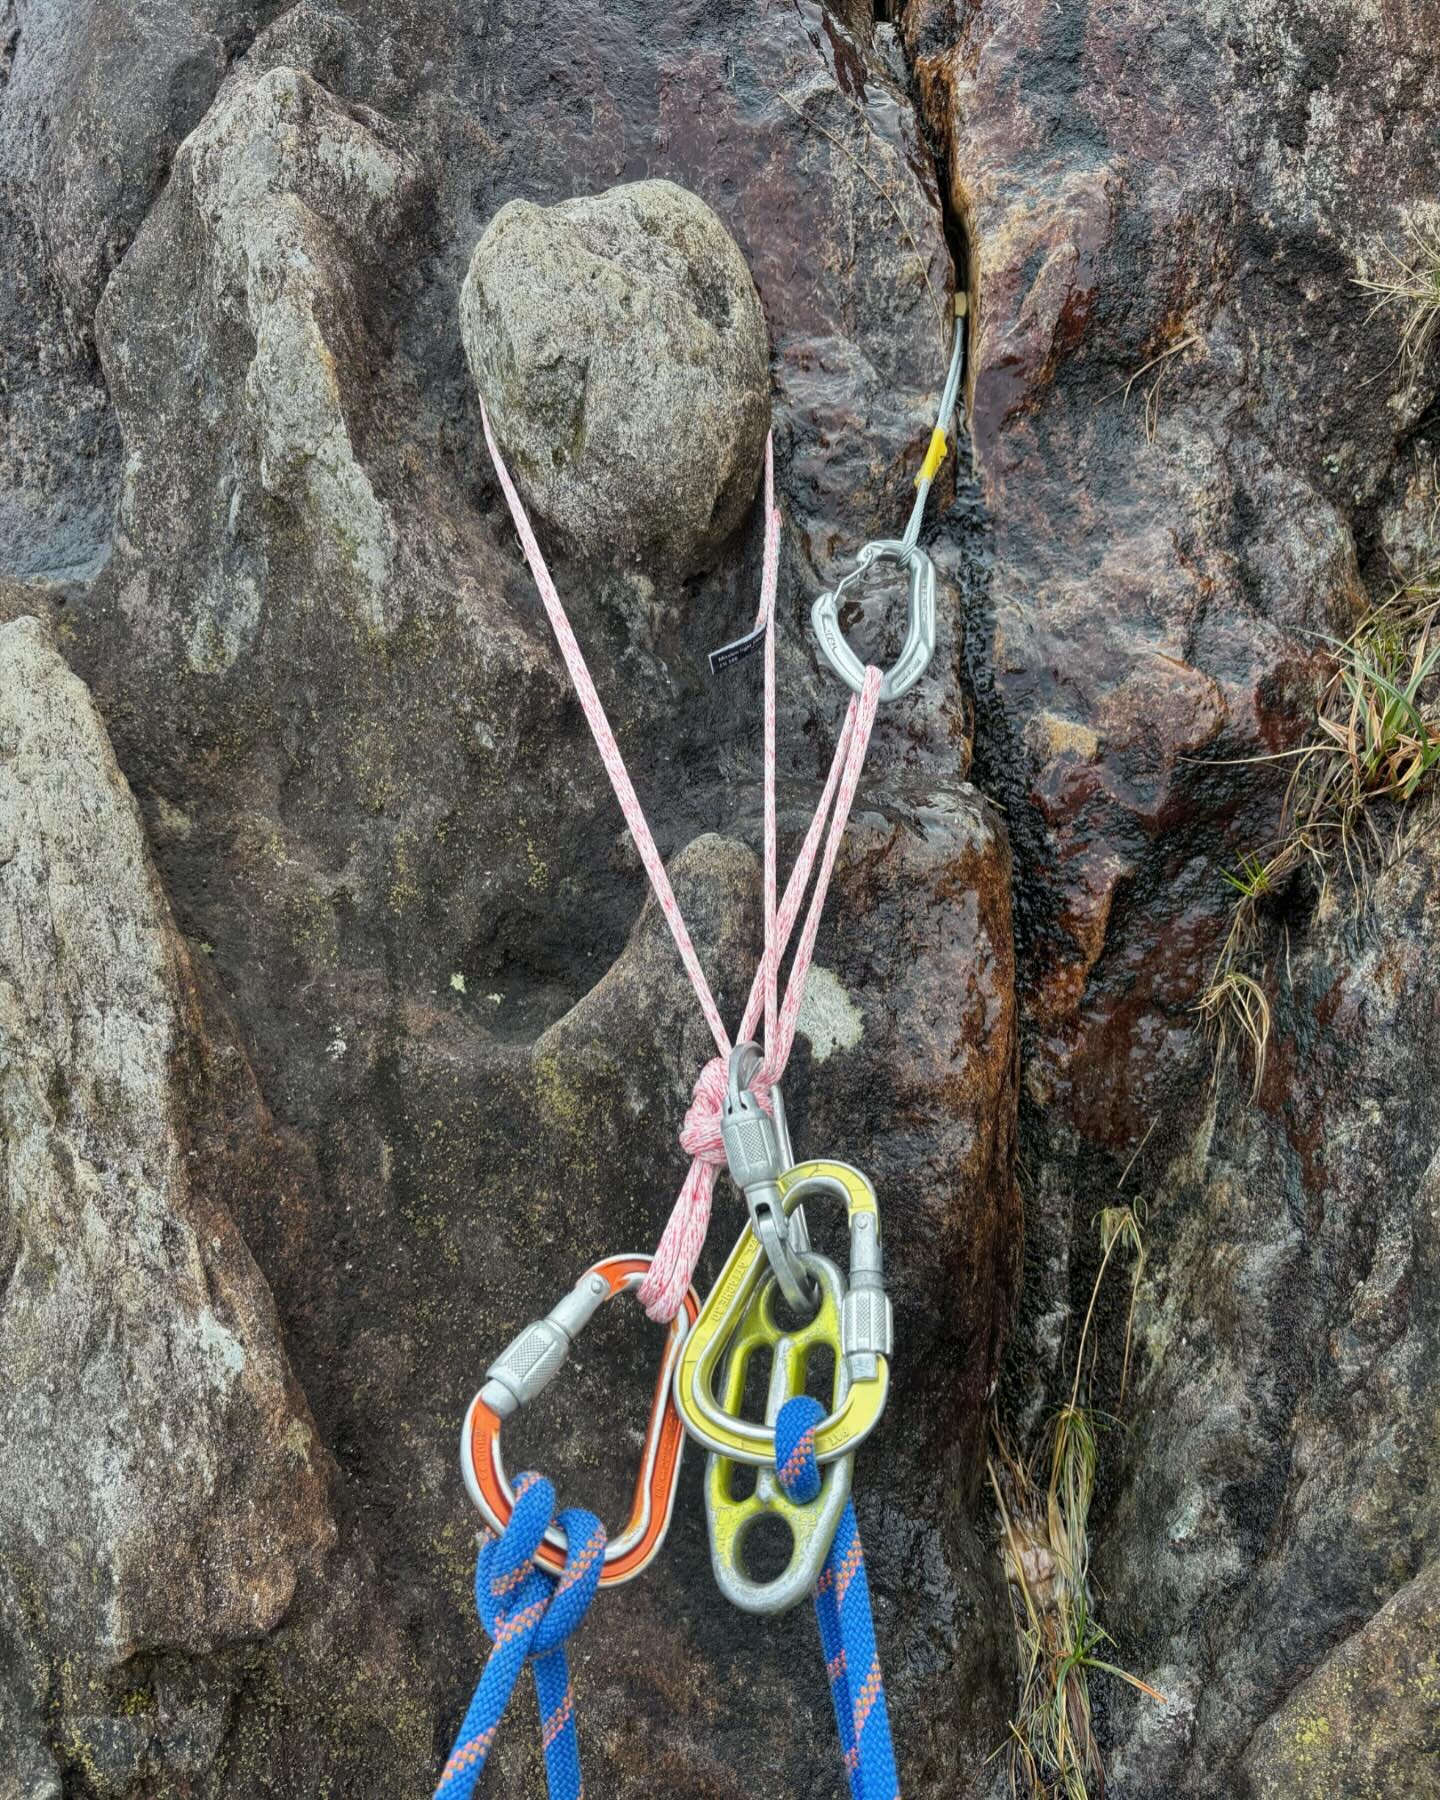 The heart ❤️ belay. Coolest bit of rock you get to anchor to in the Ogwen valley?

#rockclimbing #tradclimbing #ogwenvalley #buildbetterbelays #techtip #techtips #techtiptuesday #budbetterbelays #anchoroftheday